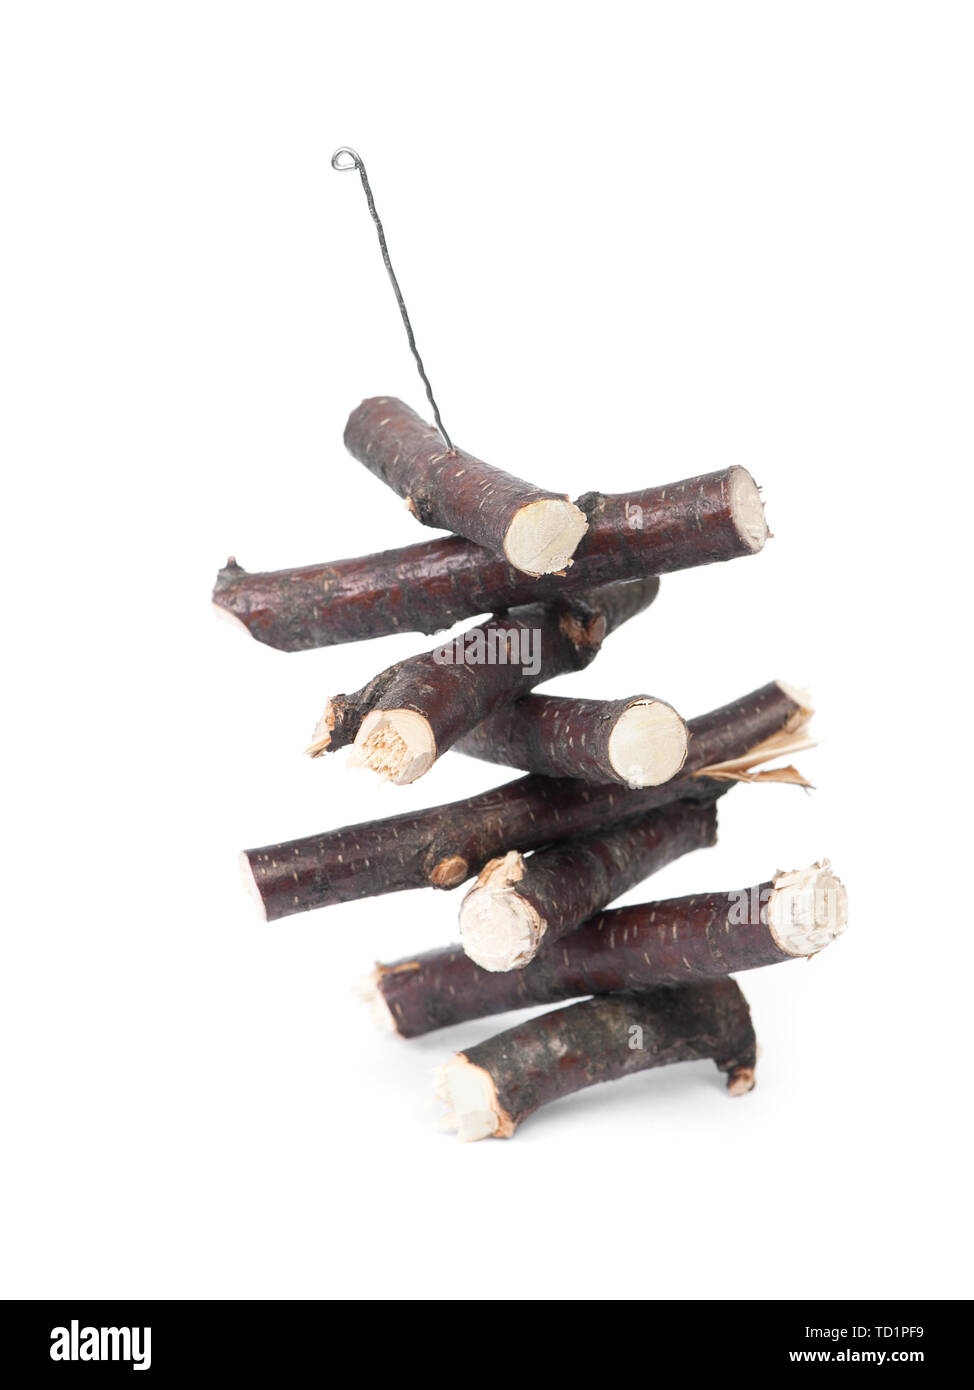 Wooden sticks food toy for rodents isolated in white background Stock Photo